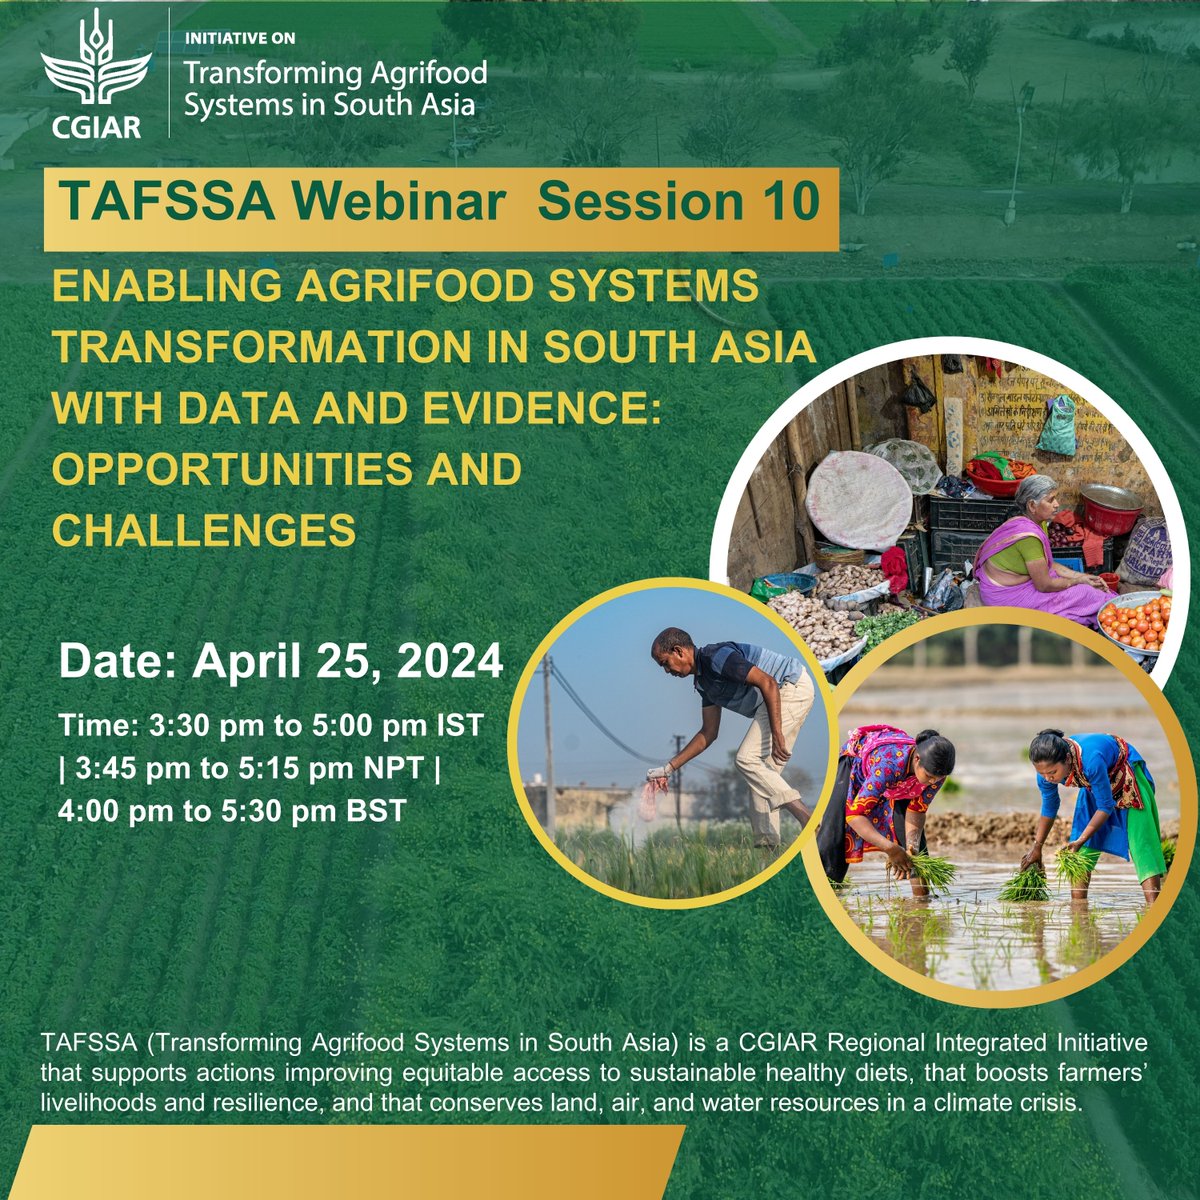 Happening today!
Webinar on 'Enabling Agrifood Systems Transformation in South Asia with Data & Evidence,'
✅ Discover key findings & learn about open access data 4m a comprehensive agrifood systems assessment in 🇧🇩🇳🇵🇮🇳 
⏲️3:30-5:00 IST
Register us06web.zoom.us/webinar/regist…